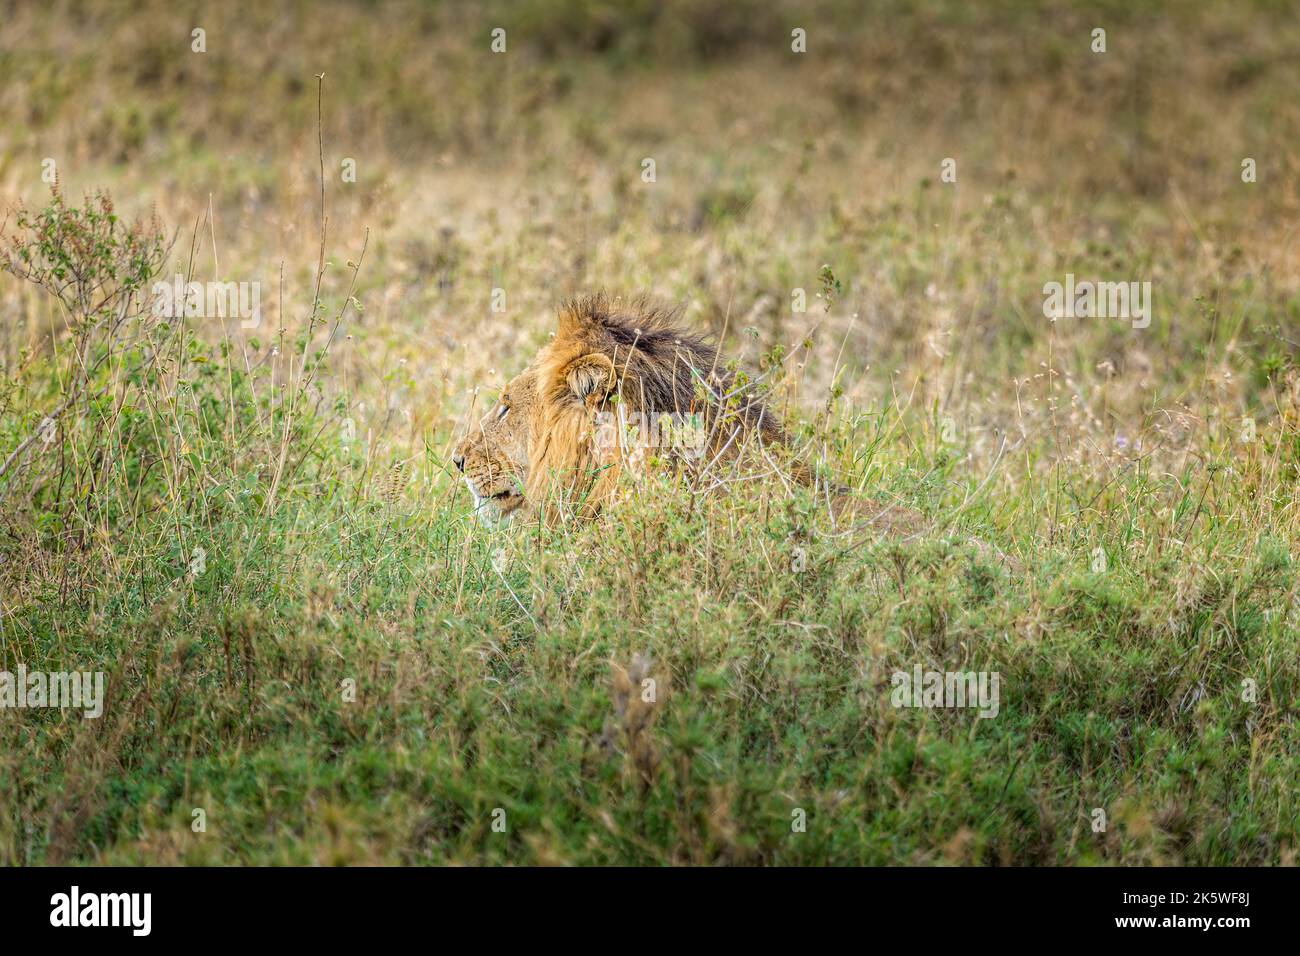 A male lion lying in the grasslands of the Serengeti, Tanzania Stock Photo